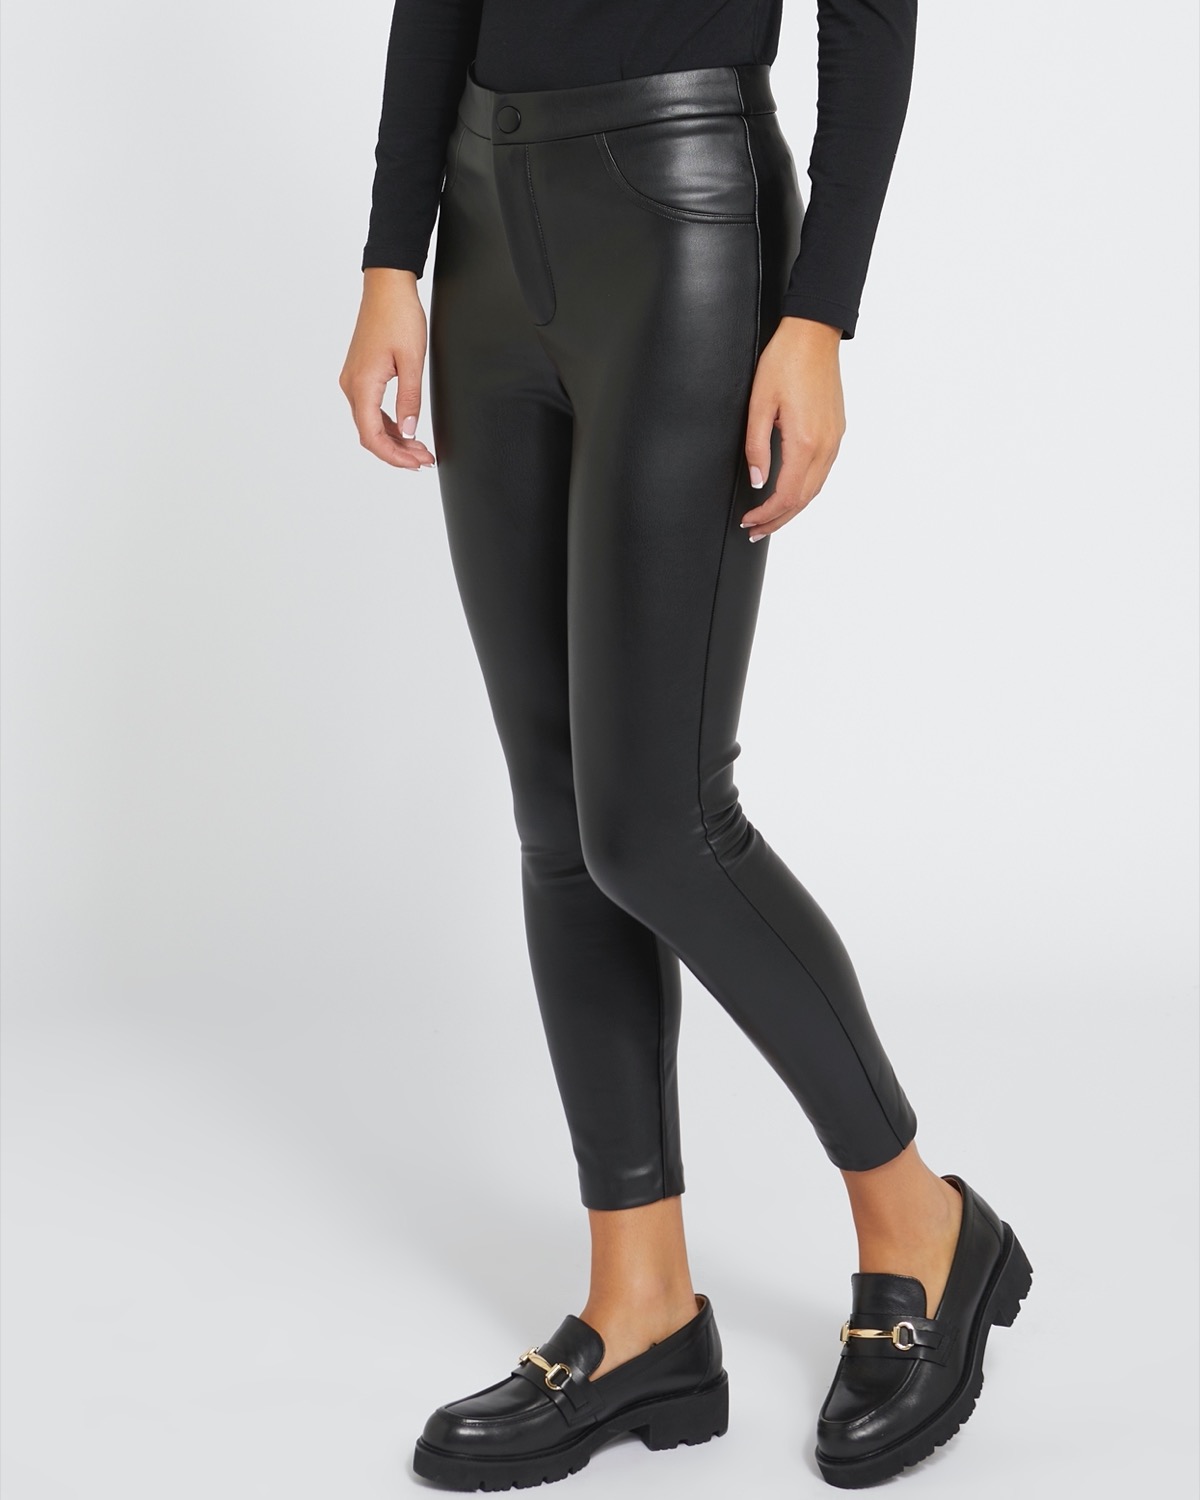 Buy Friends Like These Black PU High Waisted Jeggings from Next Netherlands